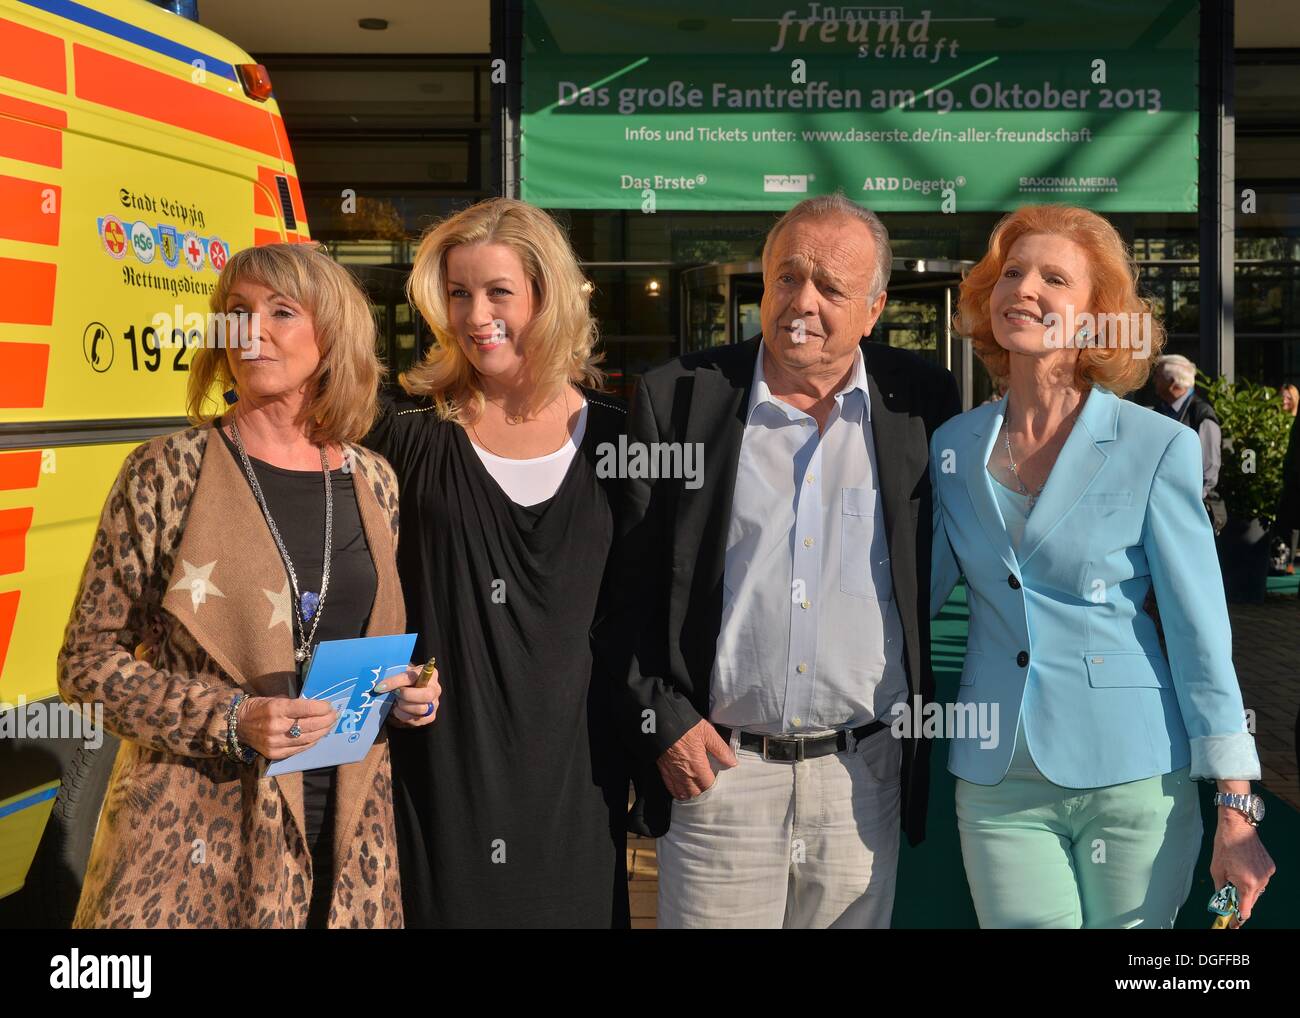 Leipzig, Germany. 19th Oct, 2013. The actors (L-R) Uta Schorn, Alexa Maria Surholt, Dieter Bellmann and Jutta Kammann open the fan festival of the ARD television series 'In aller Freundschaft' to mark its 15th anniversary in Leipzig, Germany, 19 October 2013. Photo: Hendrik Schmidt/dpa/Alamy Live News Stock Photo